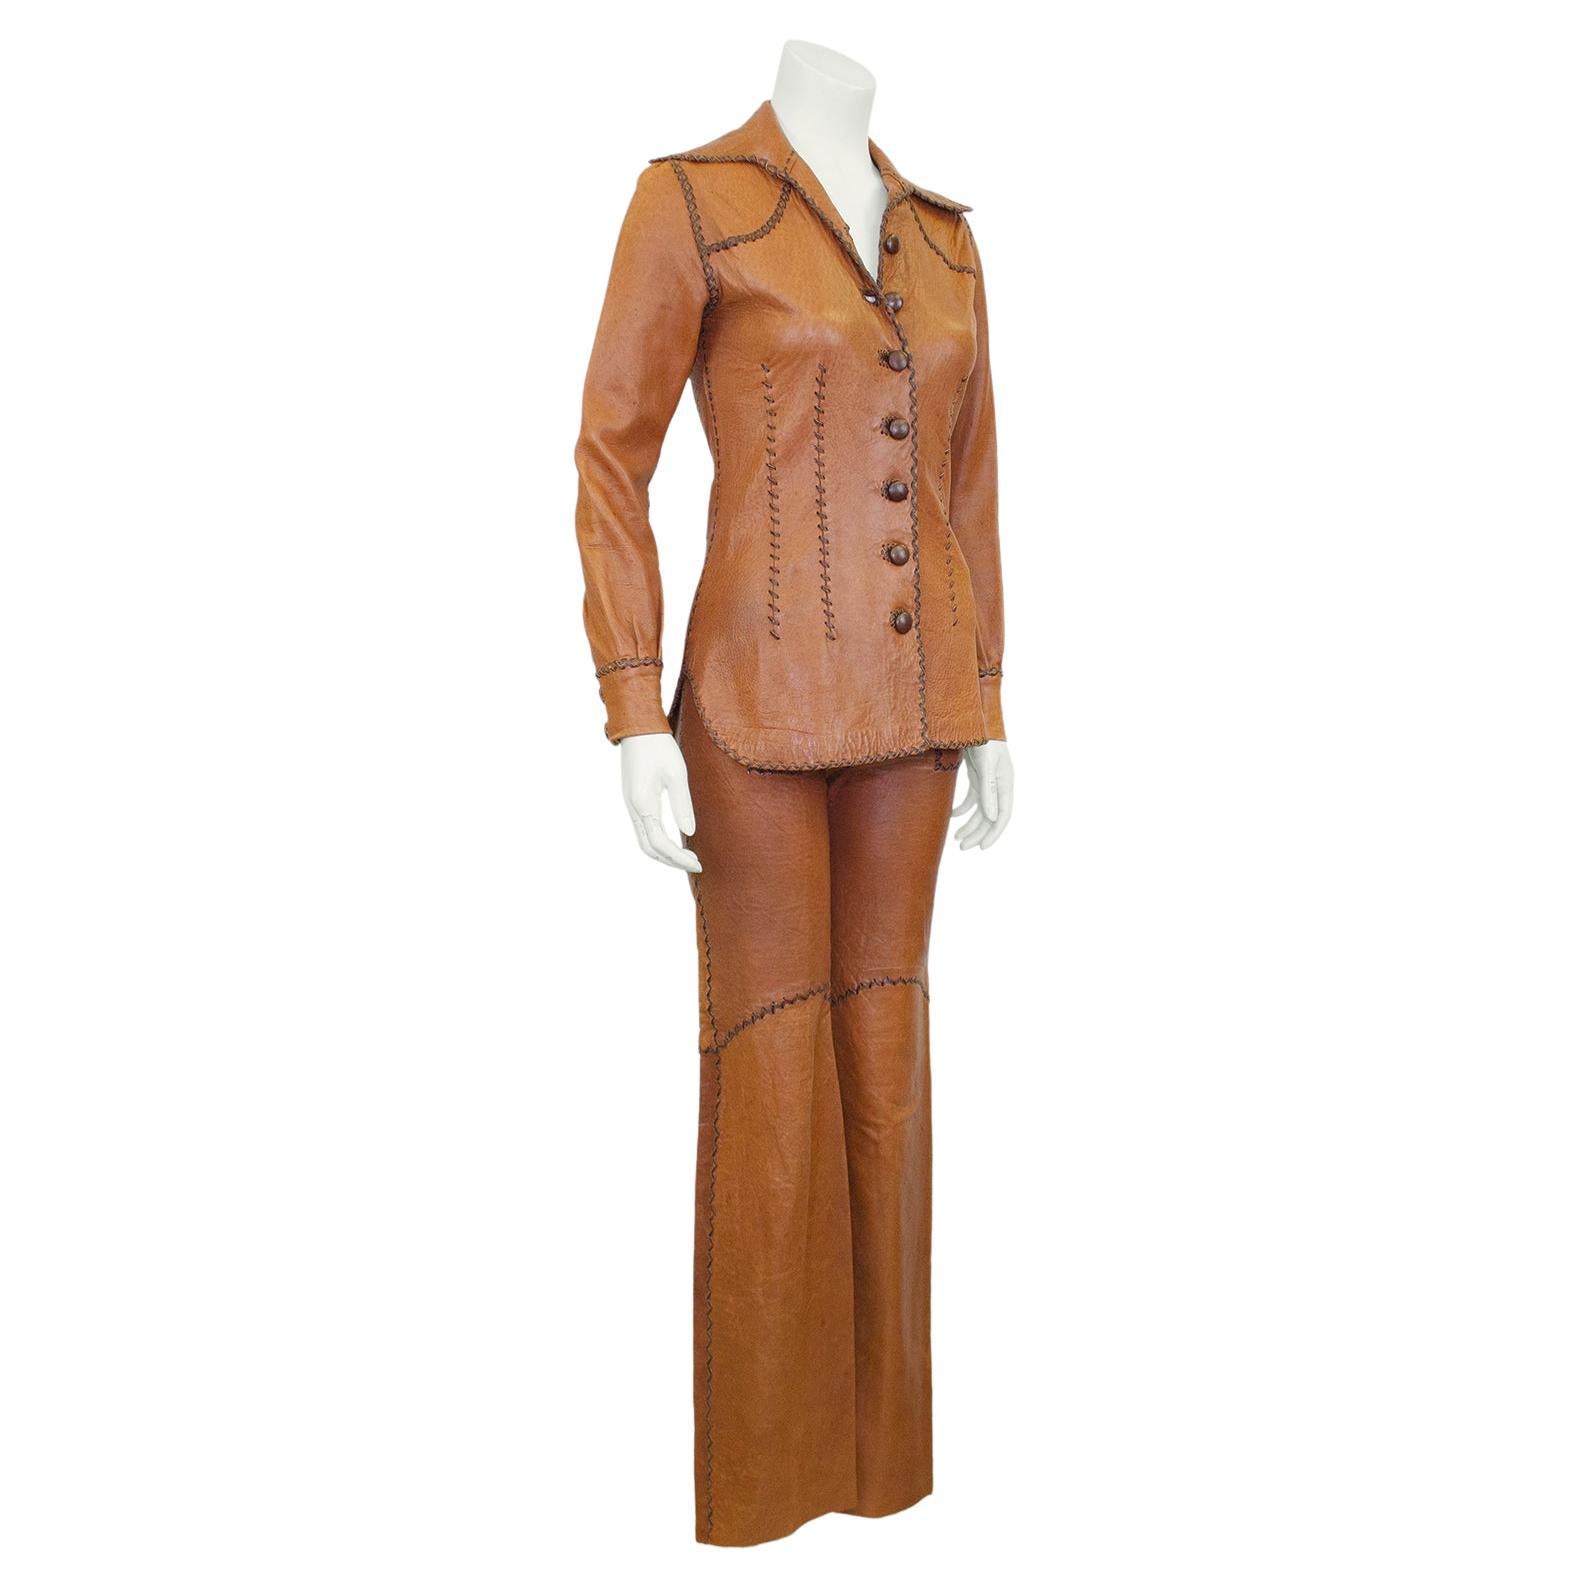 This is the iconic dream set for fans of Daisy Jones and the Six. Late 60's early 70's walnut brown North Beach Leather whipstitched shirt and matching sailor front bell bottoms. Nothing beats the hand made quality of these early pieces stitched in